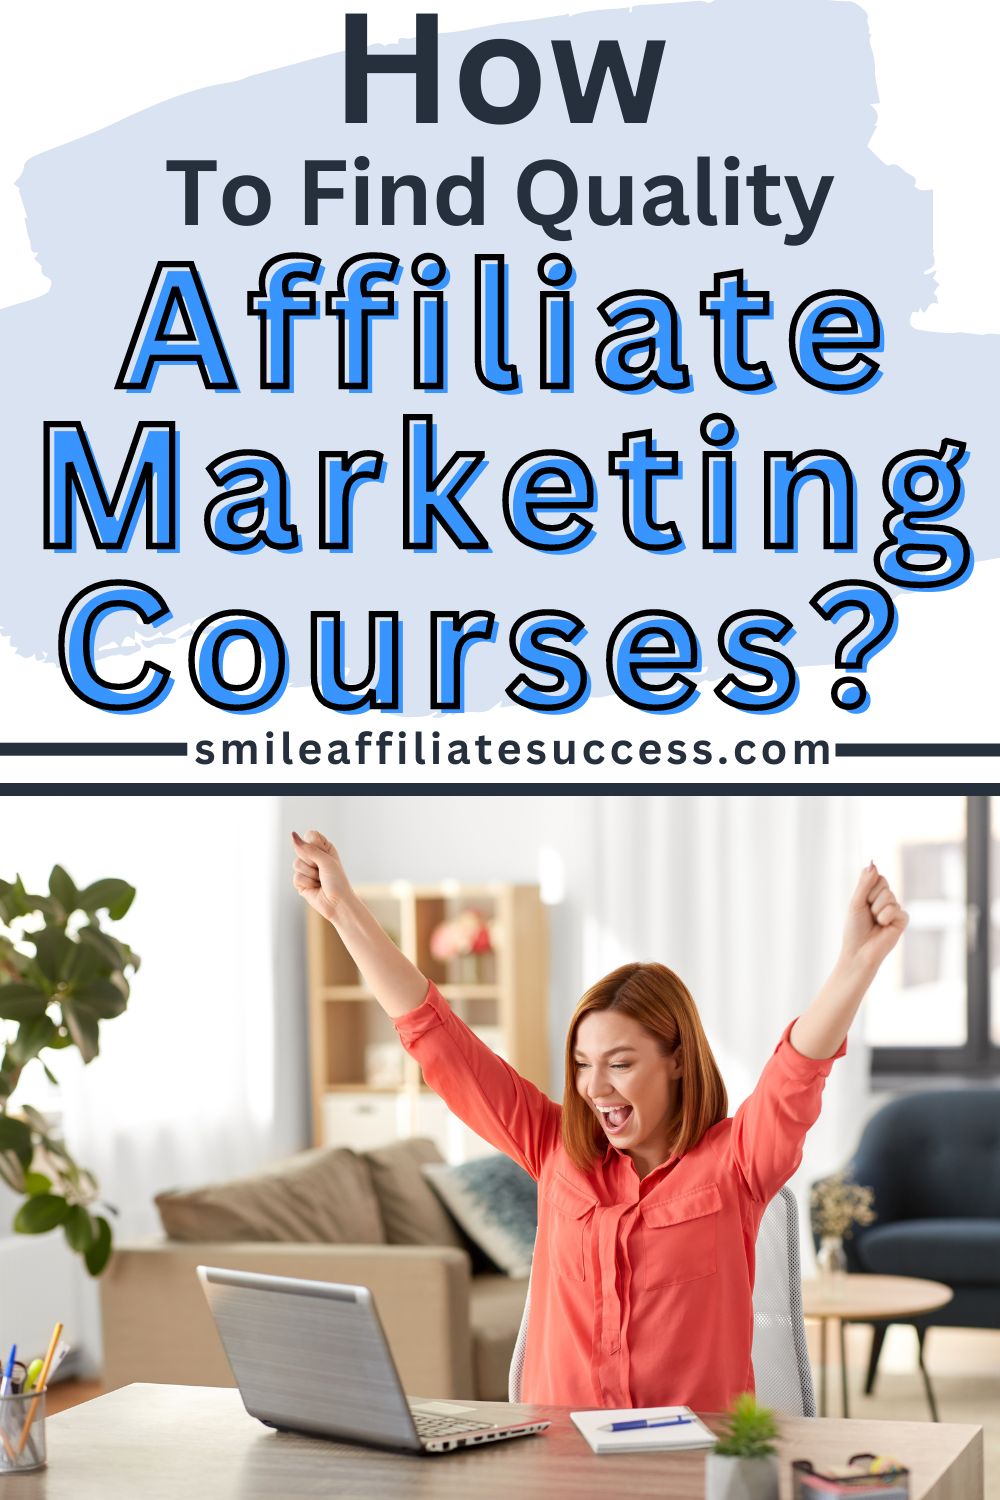 How To Find Quality Affiliate Marketing Courses?